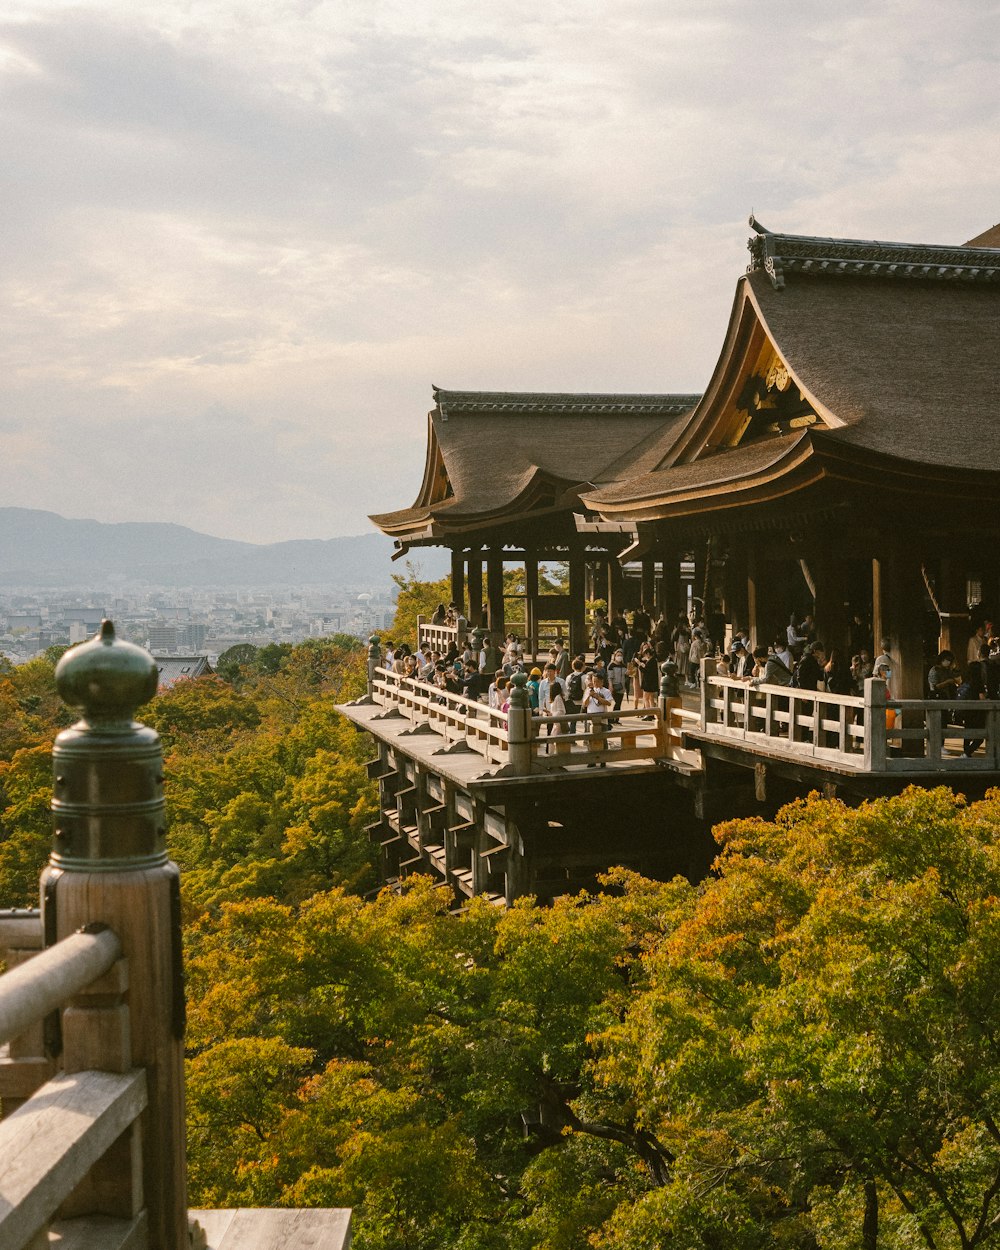 Kiyomizu-dera with a large deck and many people on it